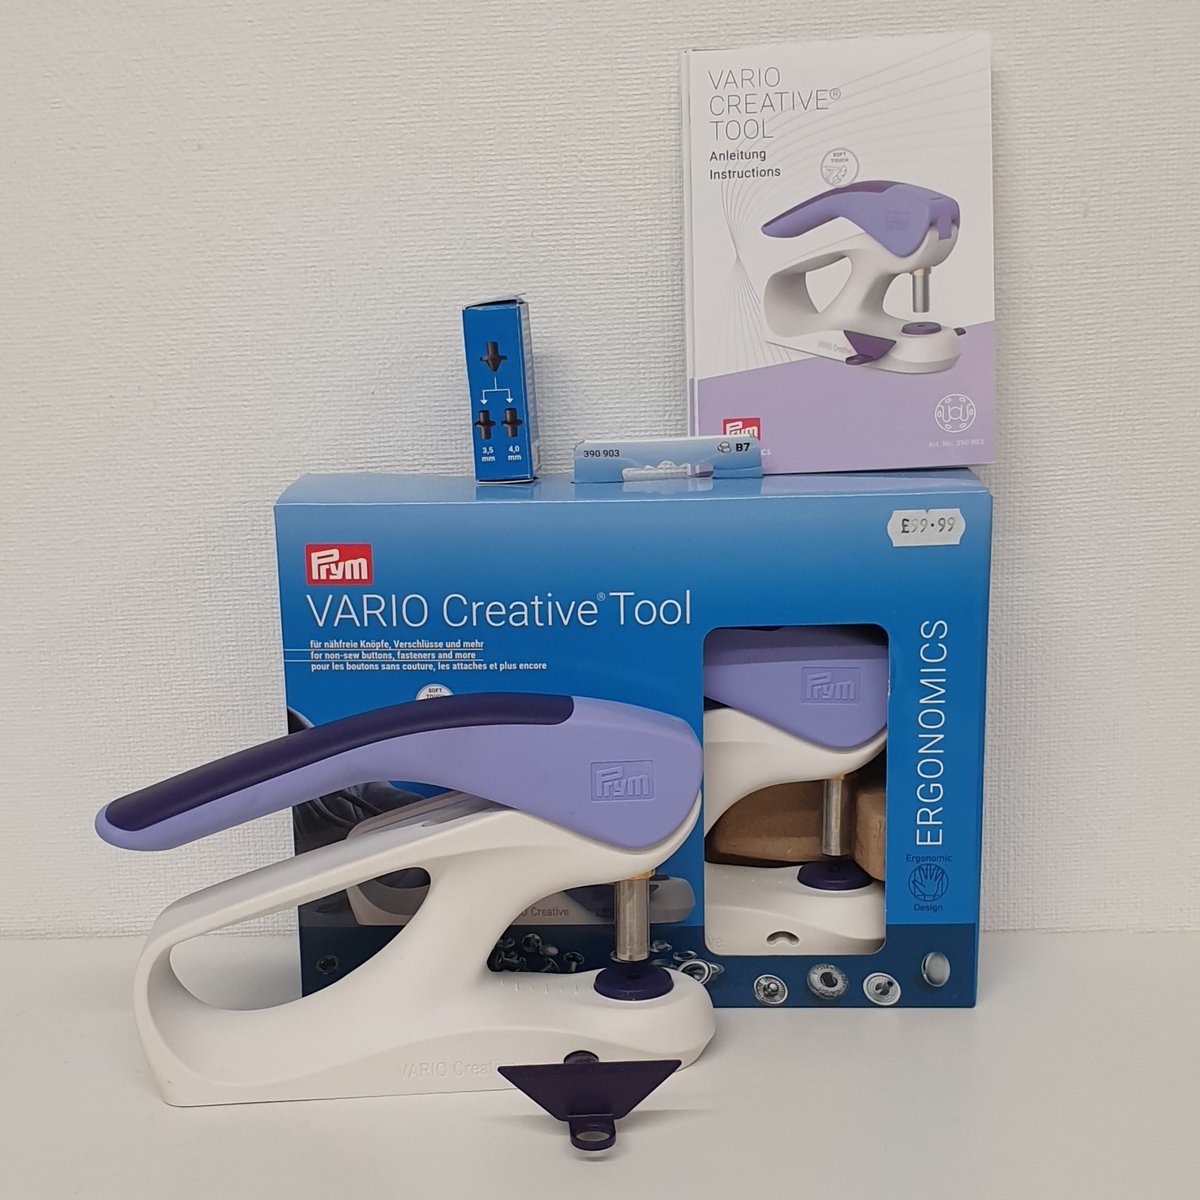 Look what we've got. 😃 The Prym Vario Creative Tool comes with piercing tools for punching holes between 2.5mm and 4mm. Tools are also available for attaching grommets, rivets and snap fasteners. nimblethimbles.co.uk #NimbleThimblesSwindon #wiltshire #prym #variocreativetool